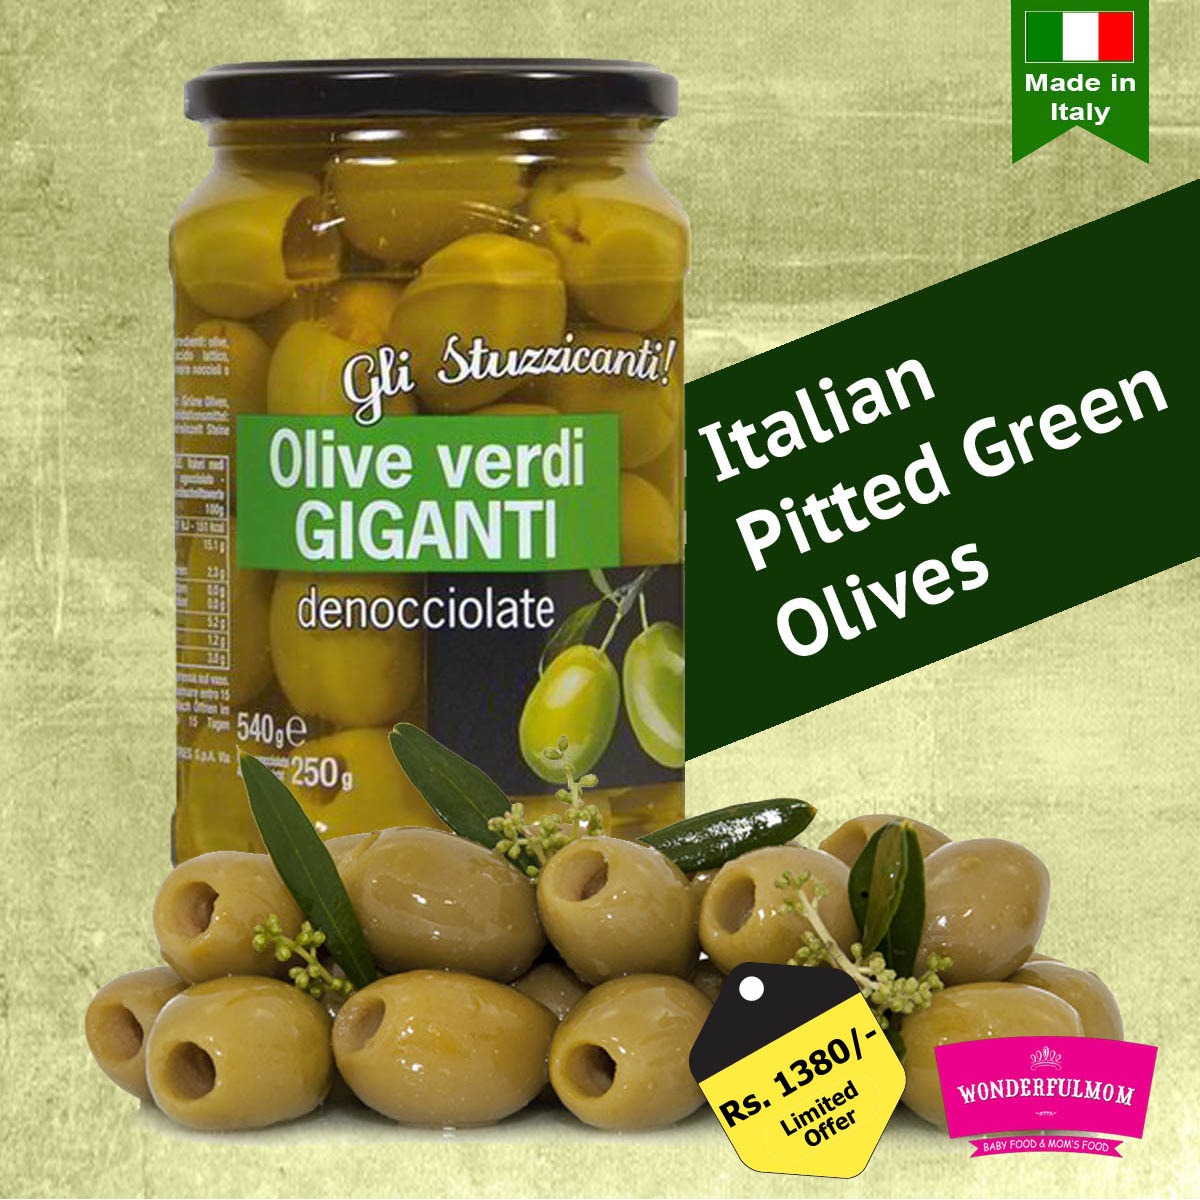 GIGANTI Italian Pitted Green Olives 540g